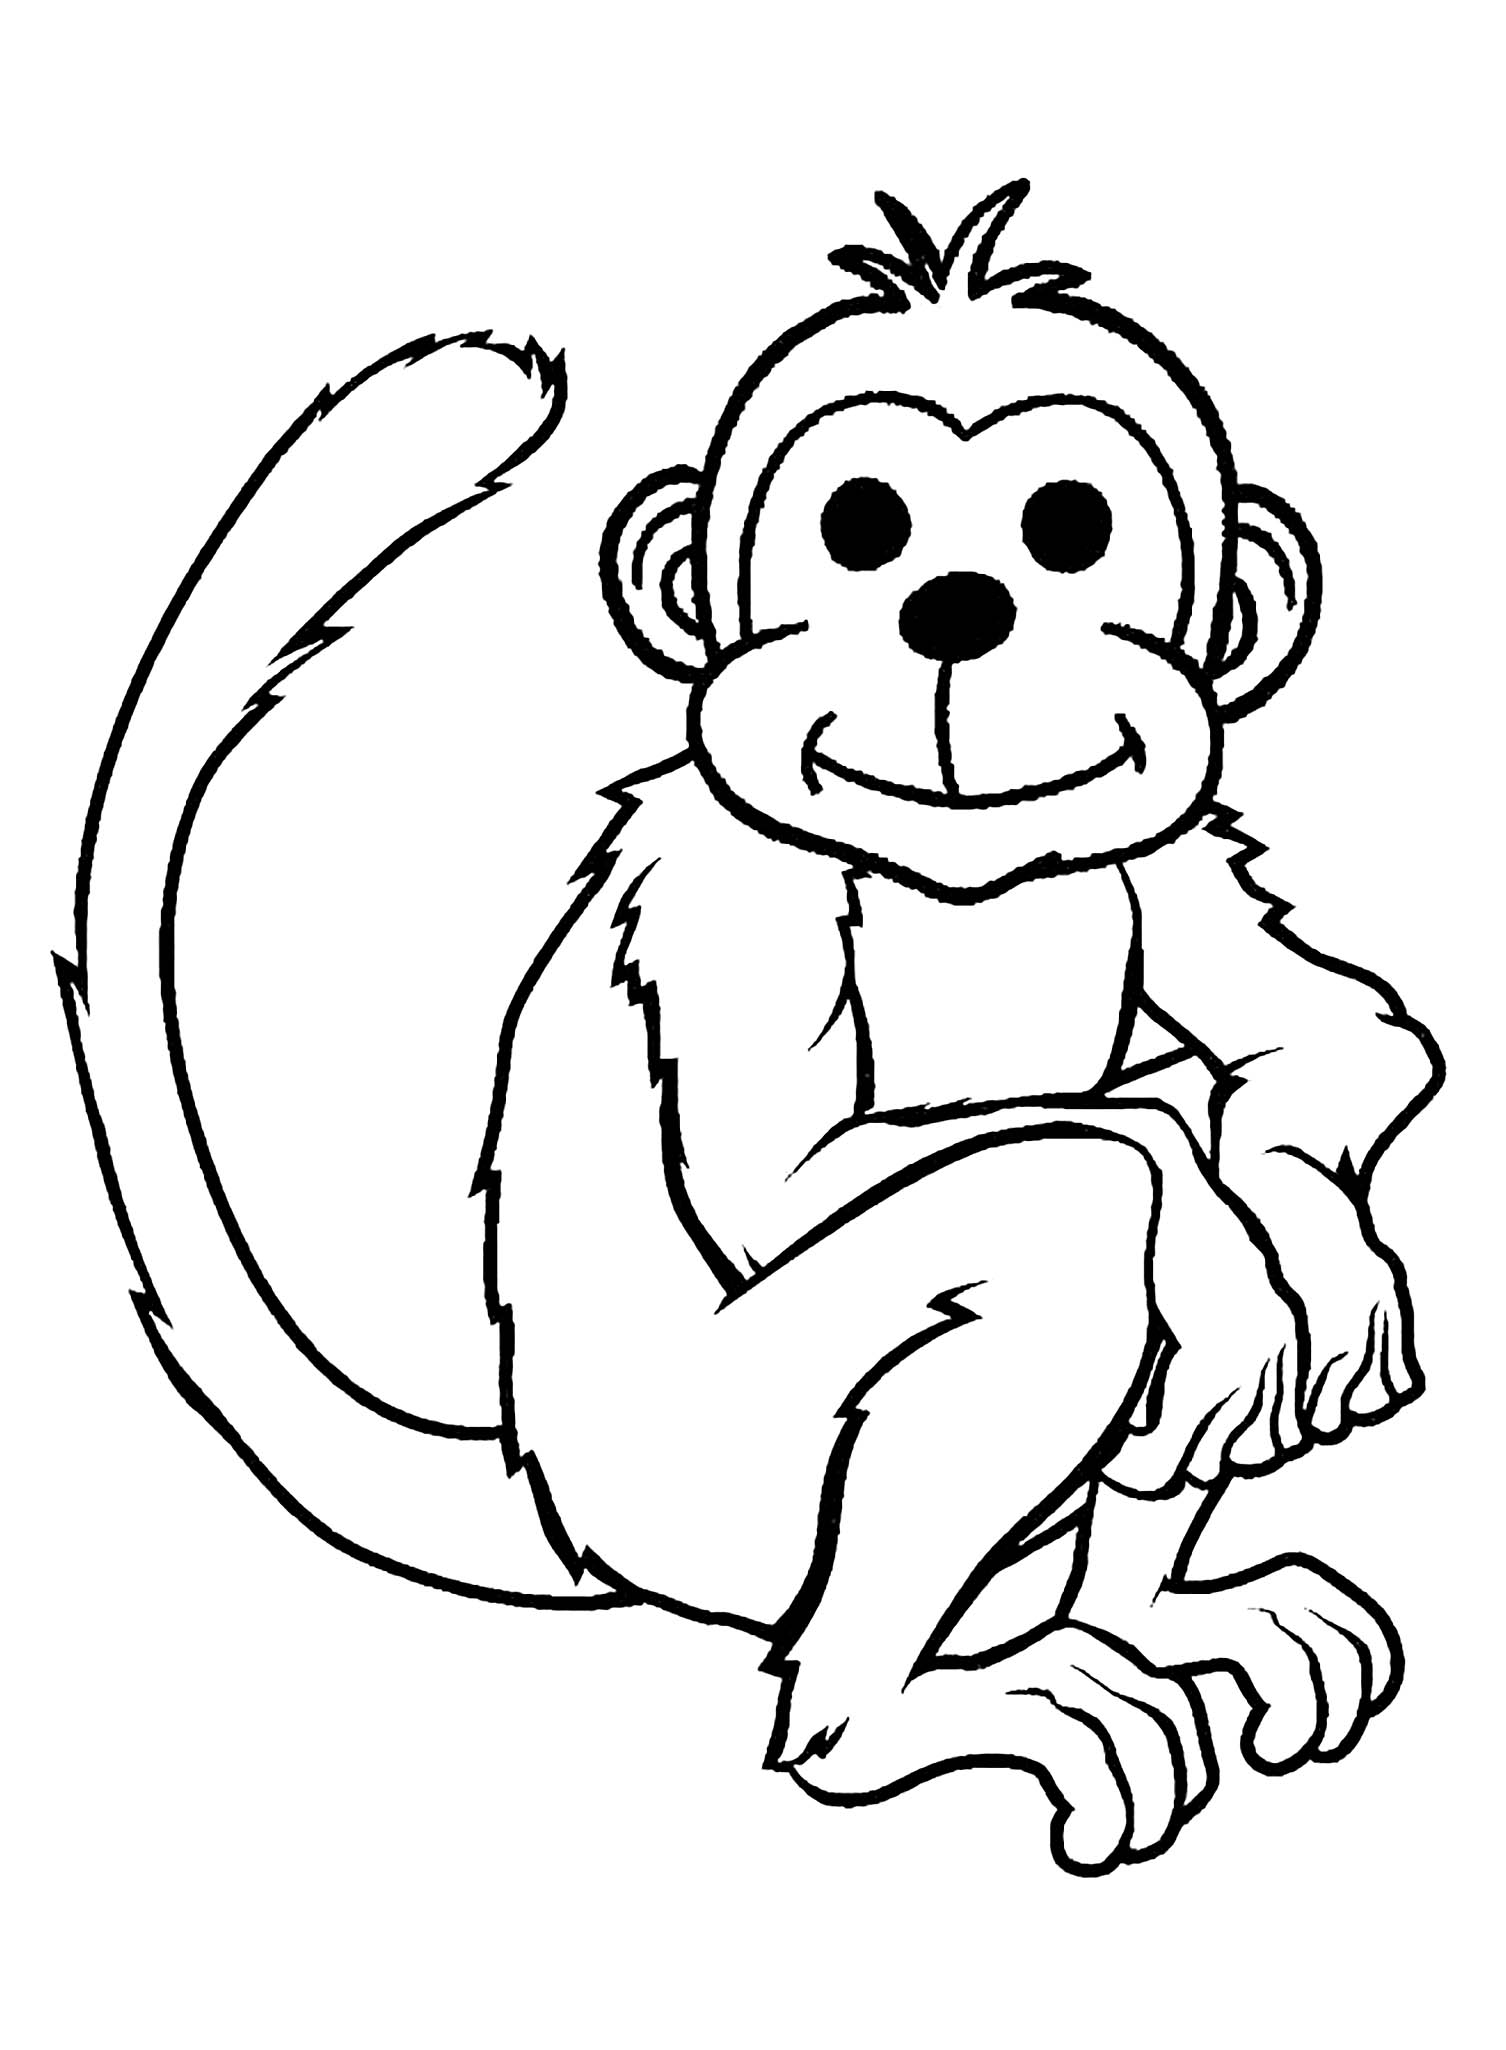 Download Monkeys to download - Monkeys Kids Coloring Pages